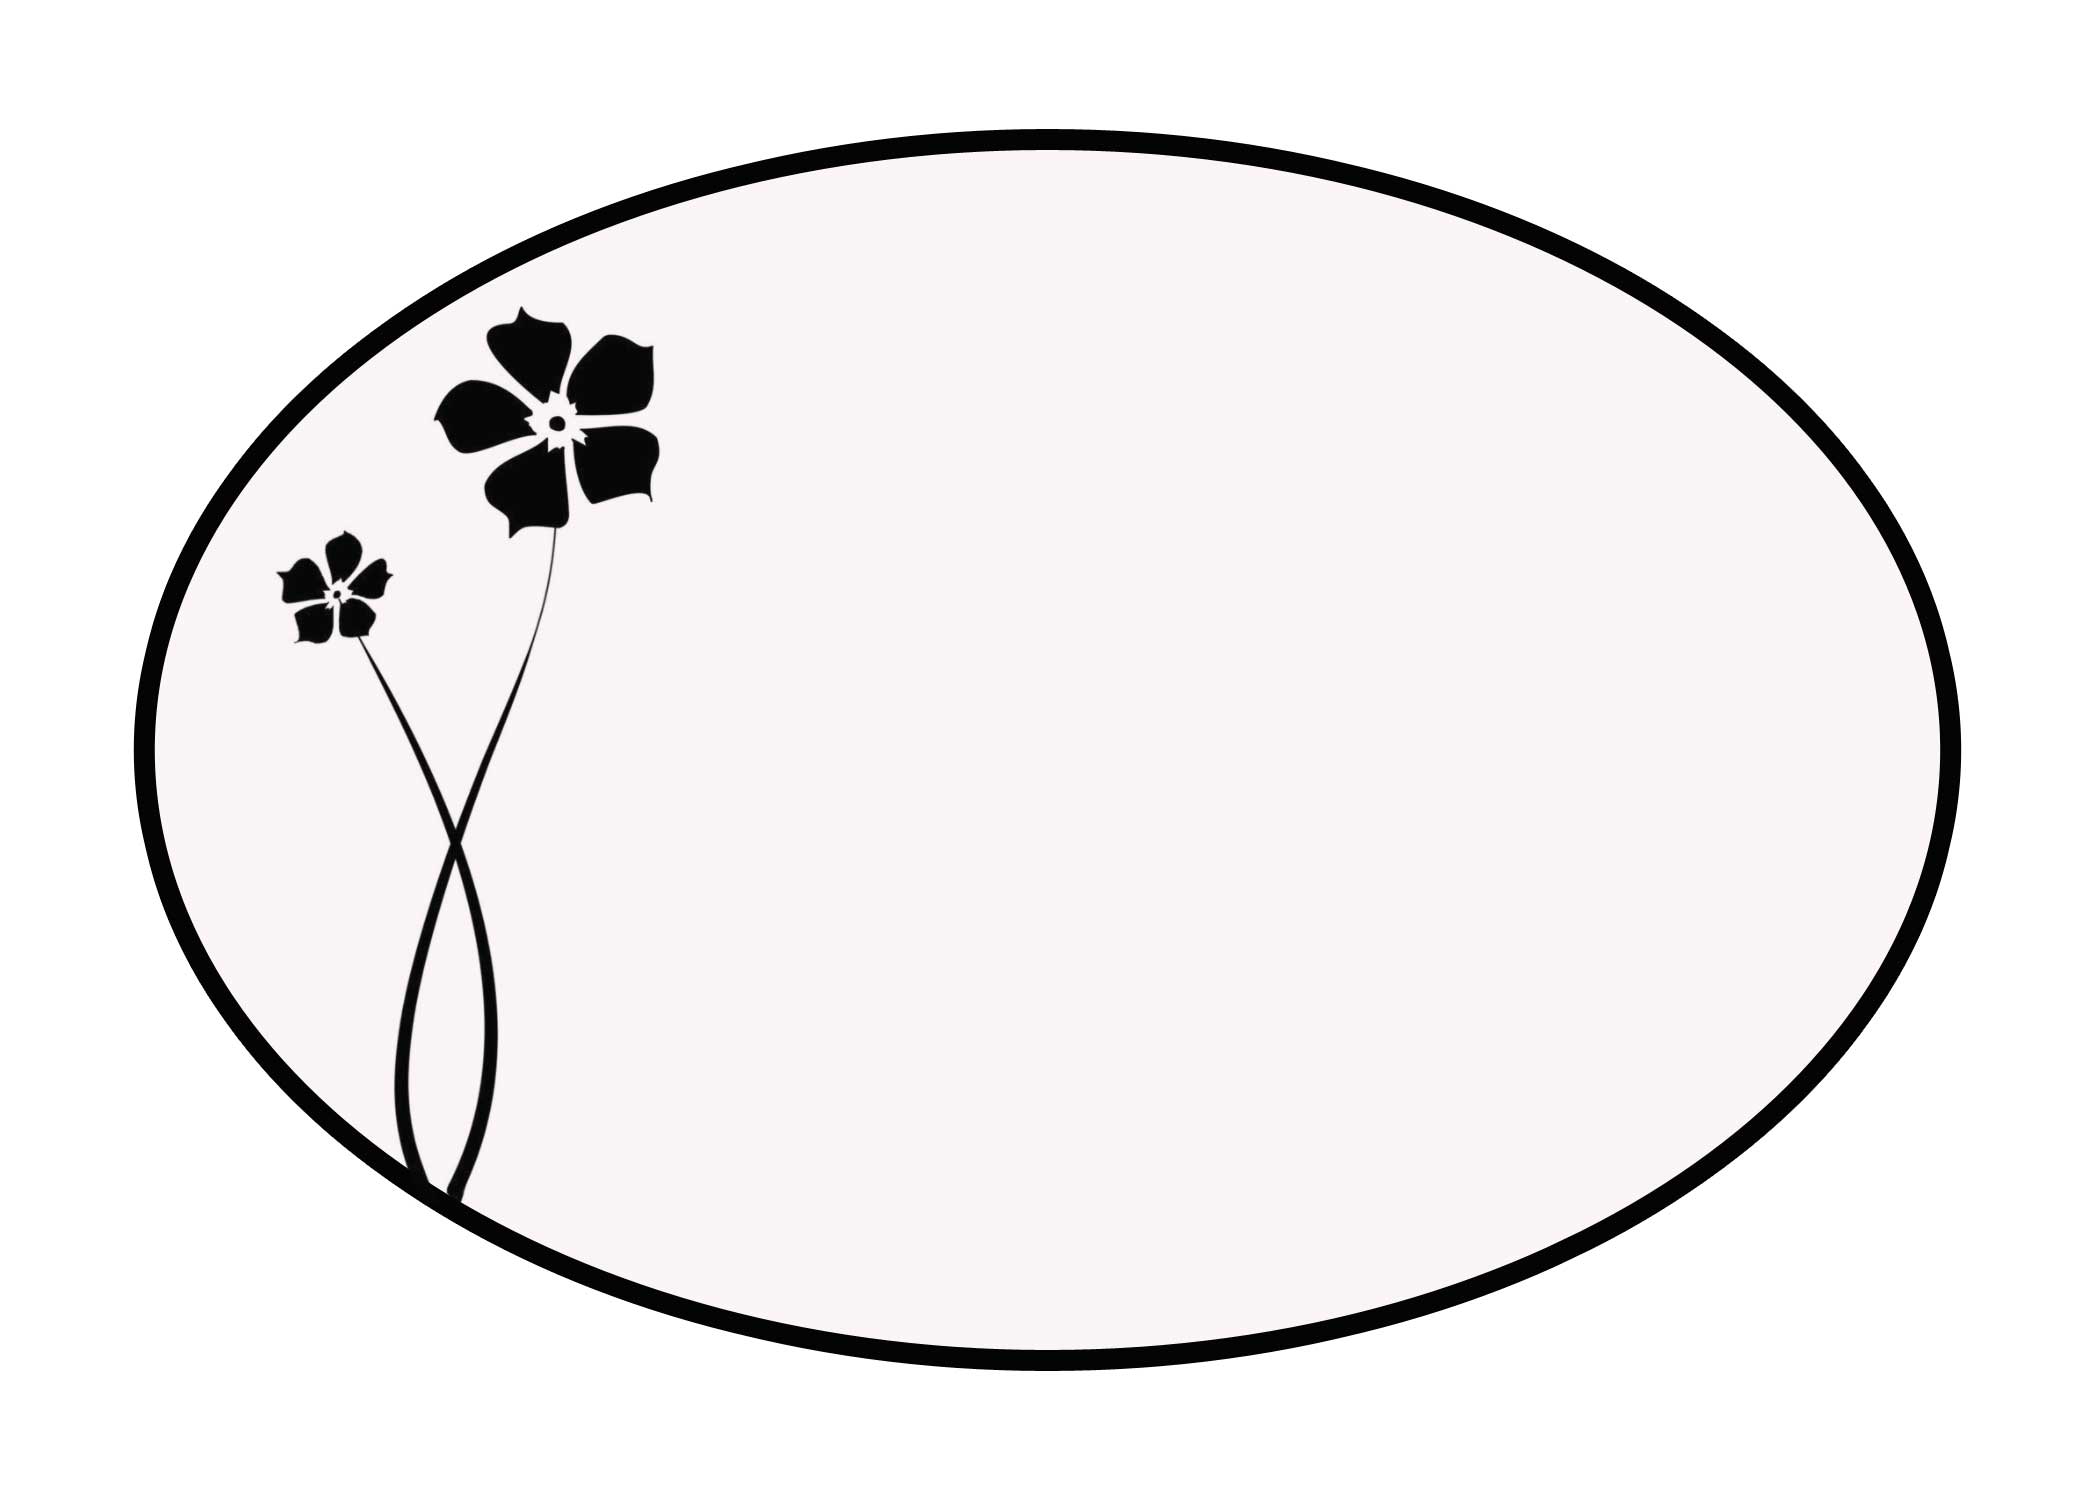 Oval Shape Template | Jos Gandos Coloring Pages For Kids